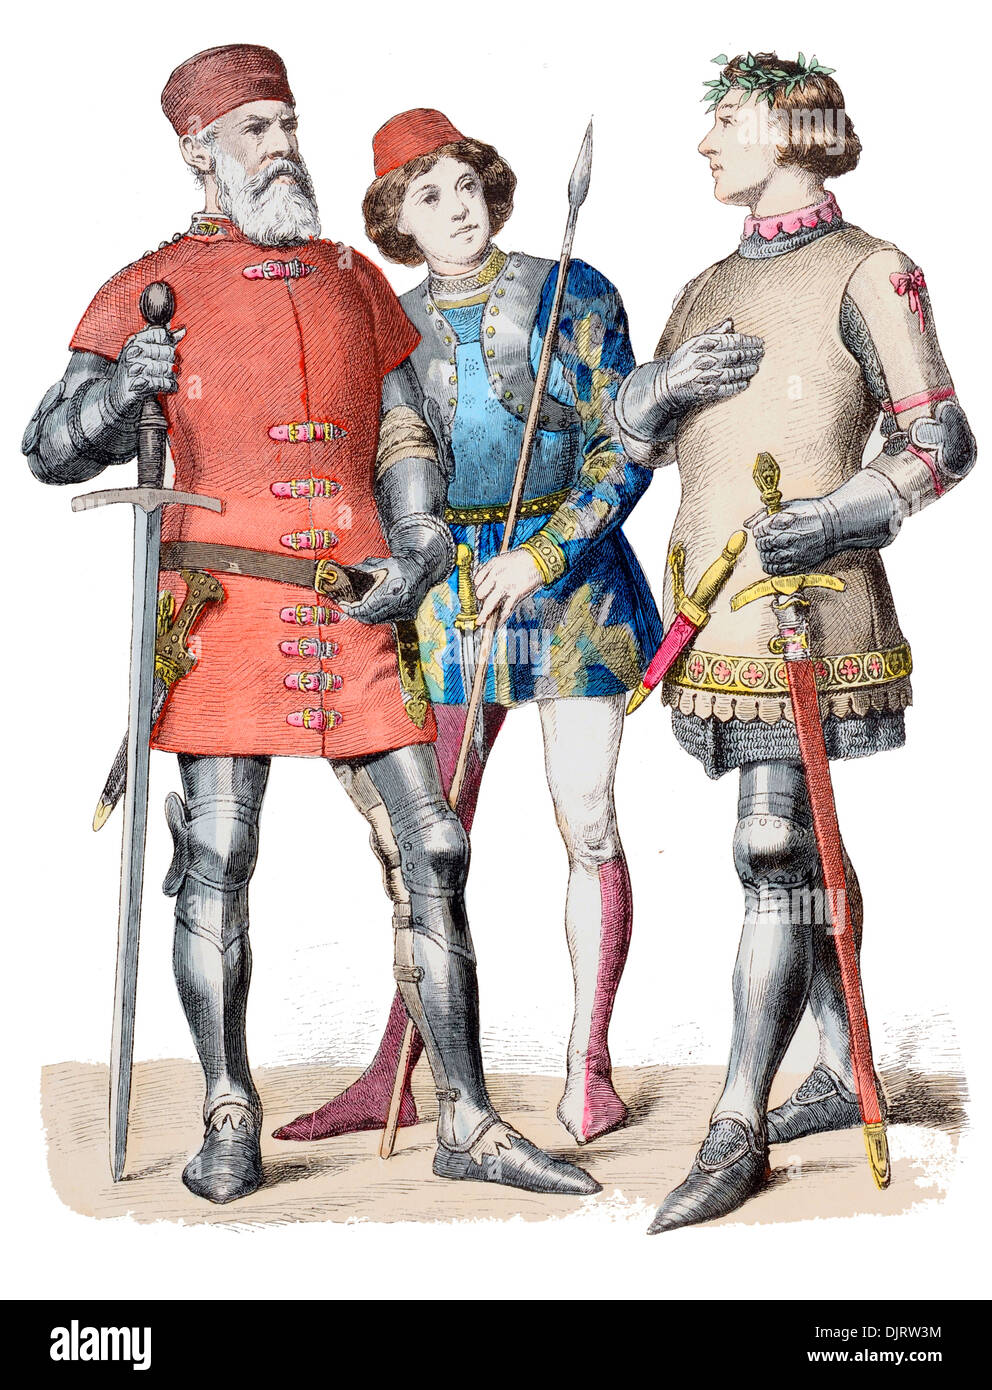 14th Century XIV 1300s Italy From (Left to right)  Venetian admiral, Soldier, Neapolitan Knight Stock Photo